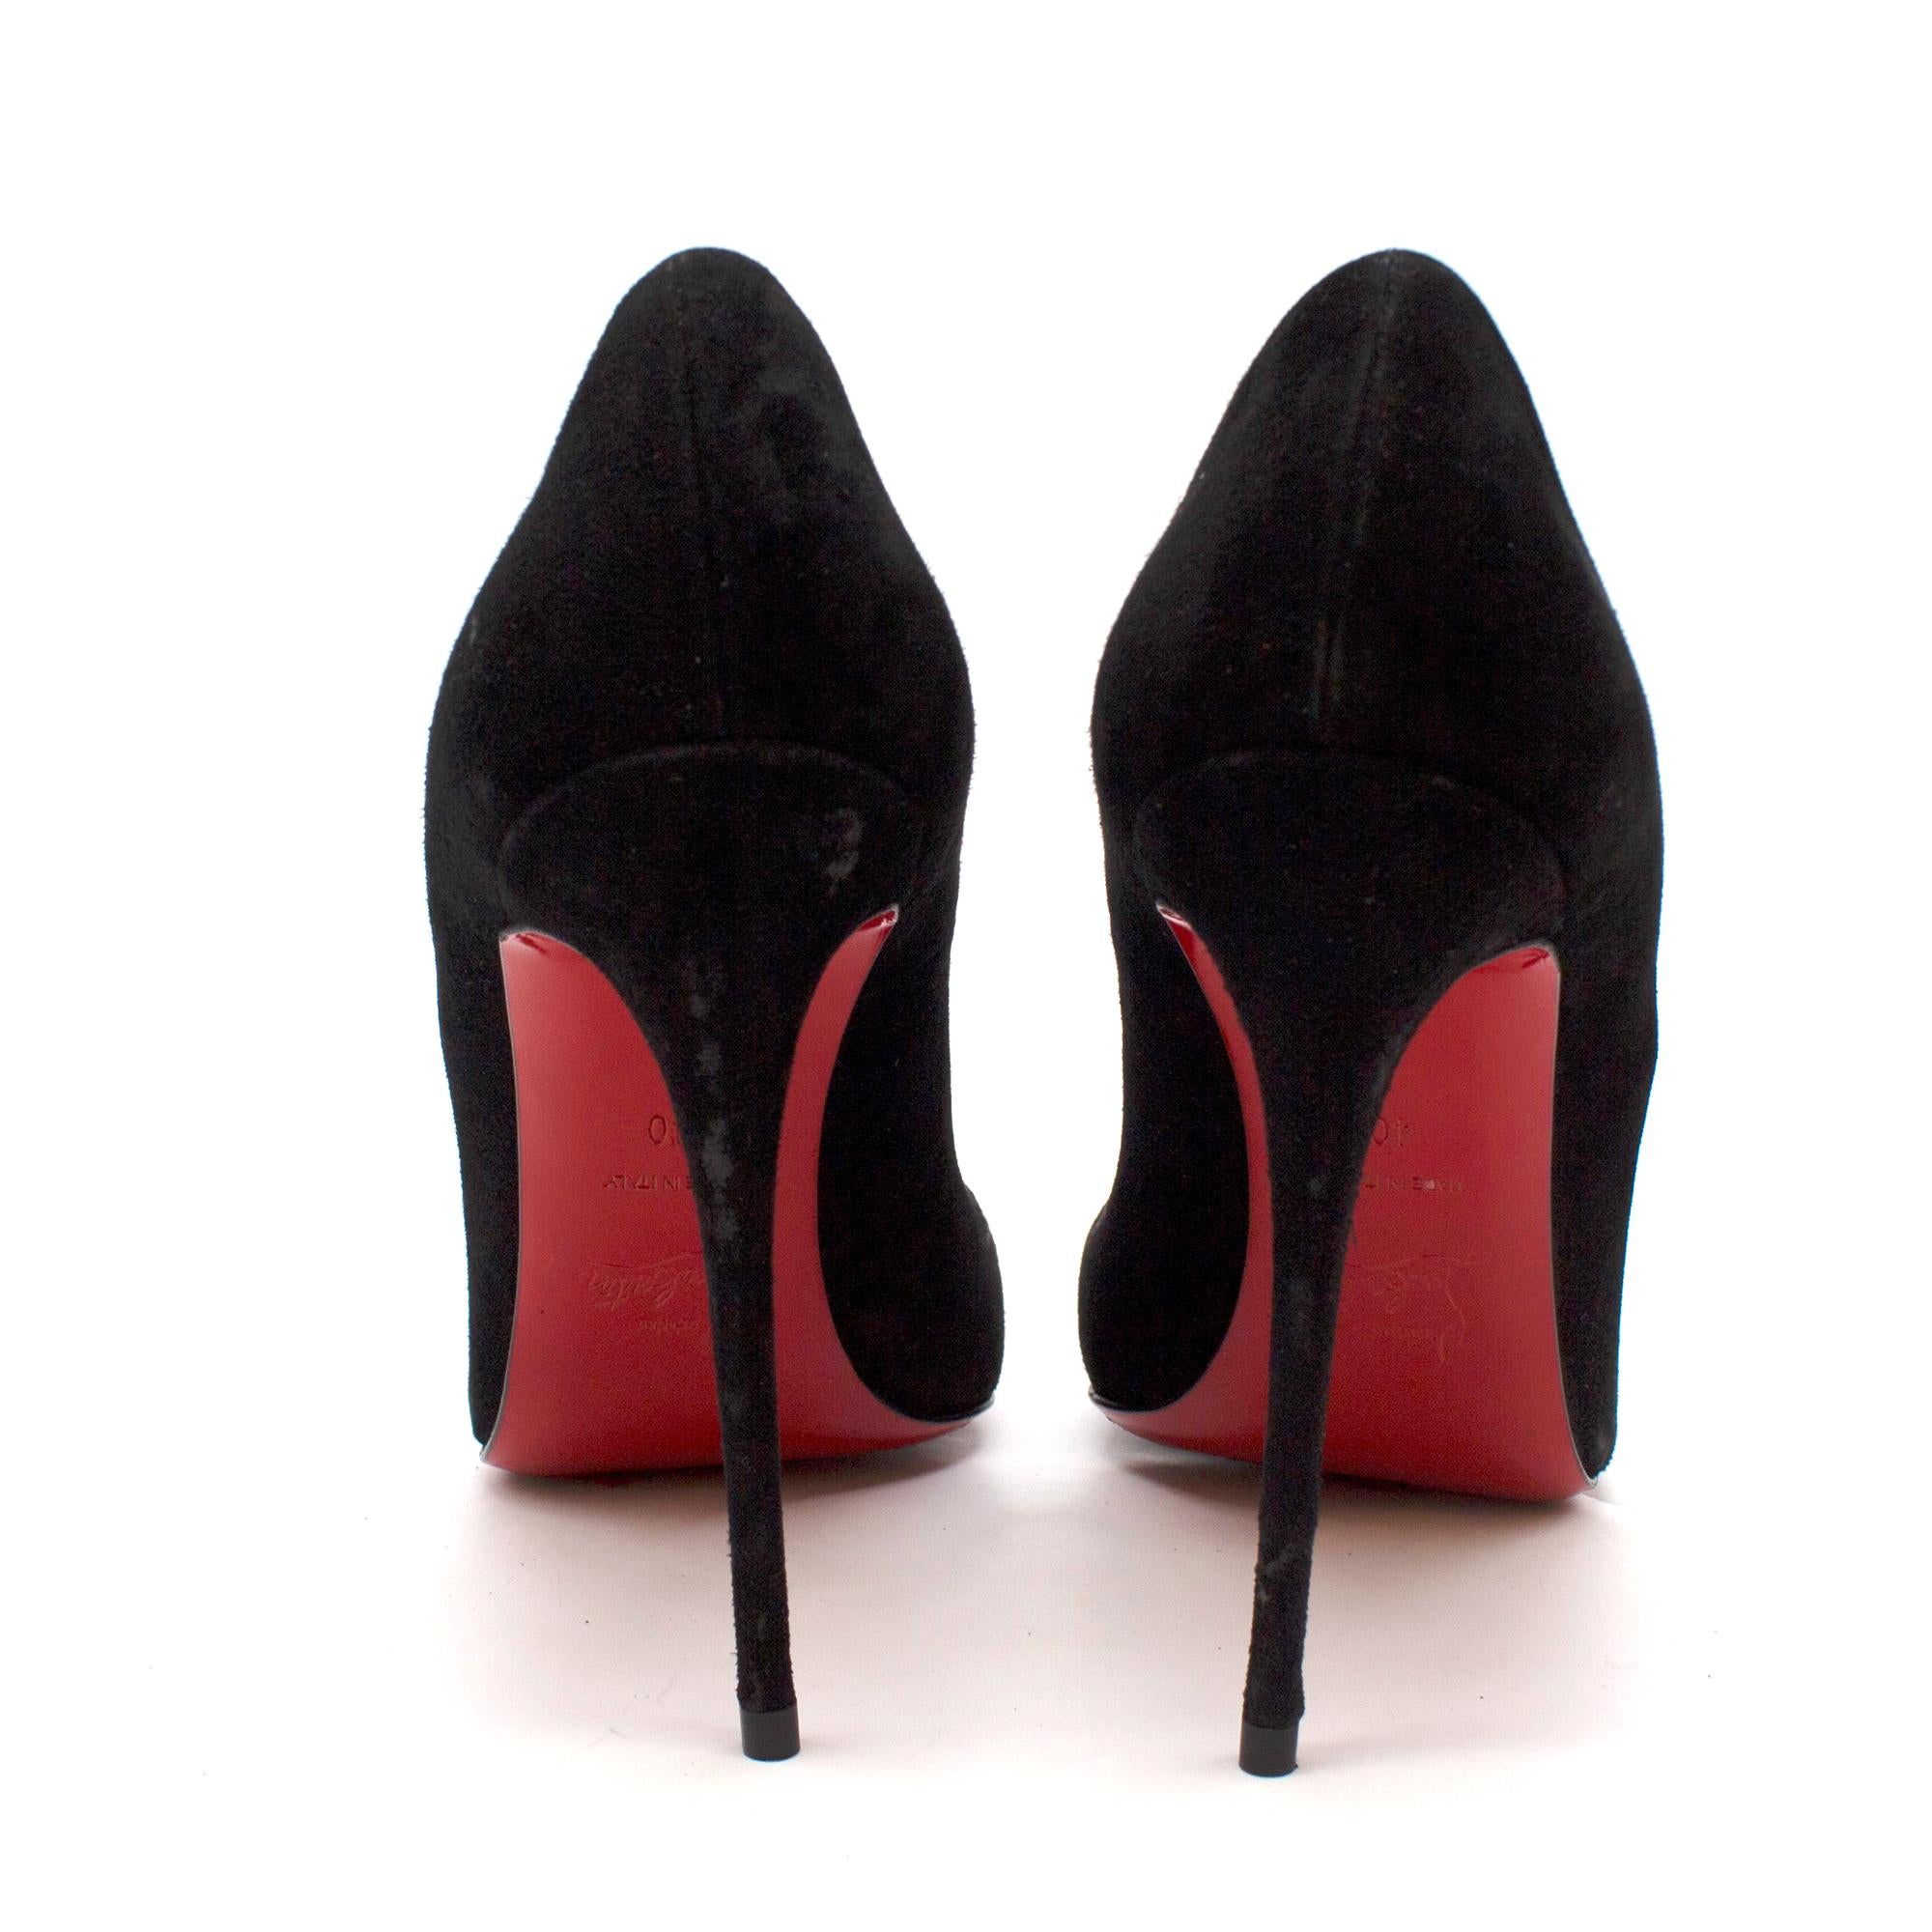 Christian Louboutin So Kate 120mm suede pumps

- Black, suede 
- Point toe, suede-covered high stiletto heel 
- Nude leather lining and insole
- Signature red leather sole

Please note, these items are pre-owned and may show some signs of storage,